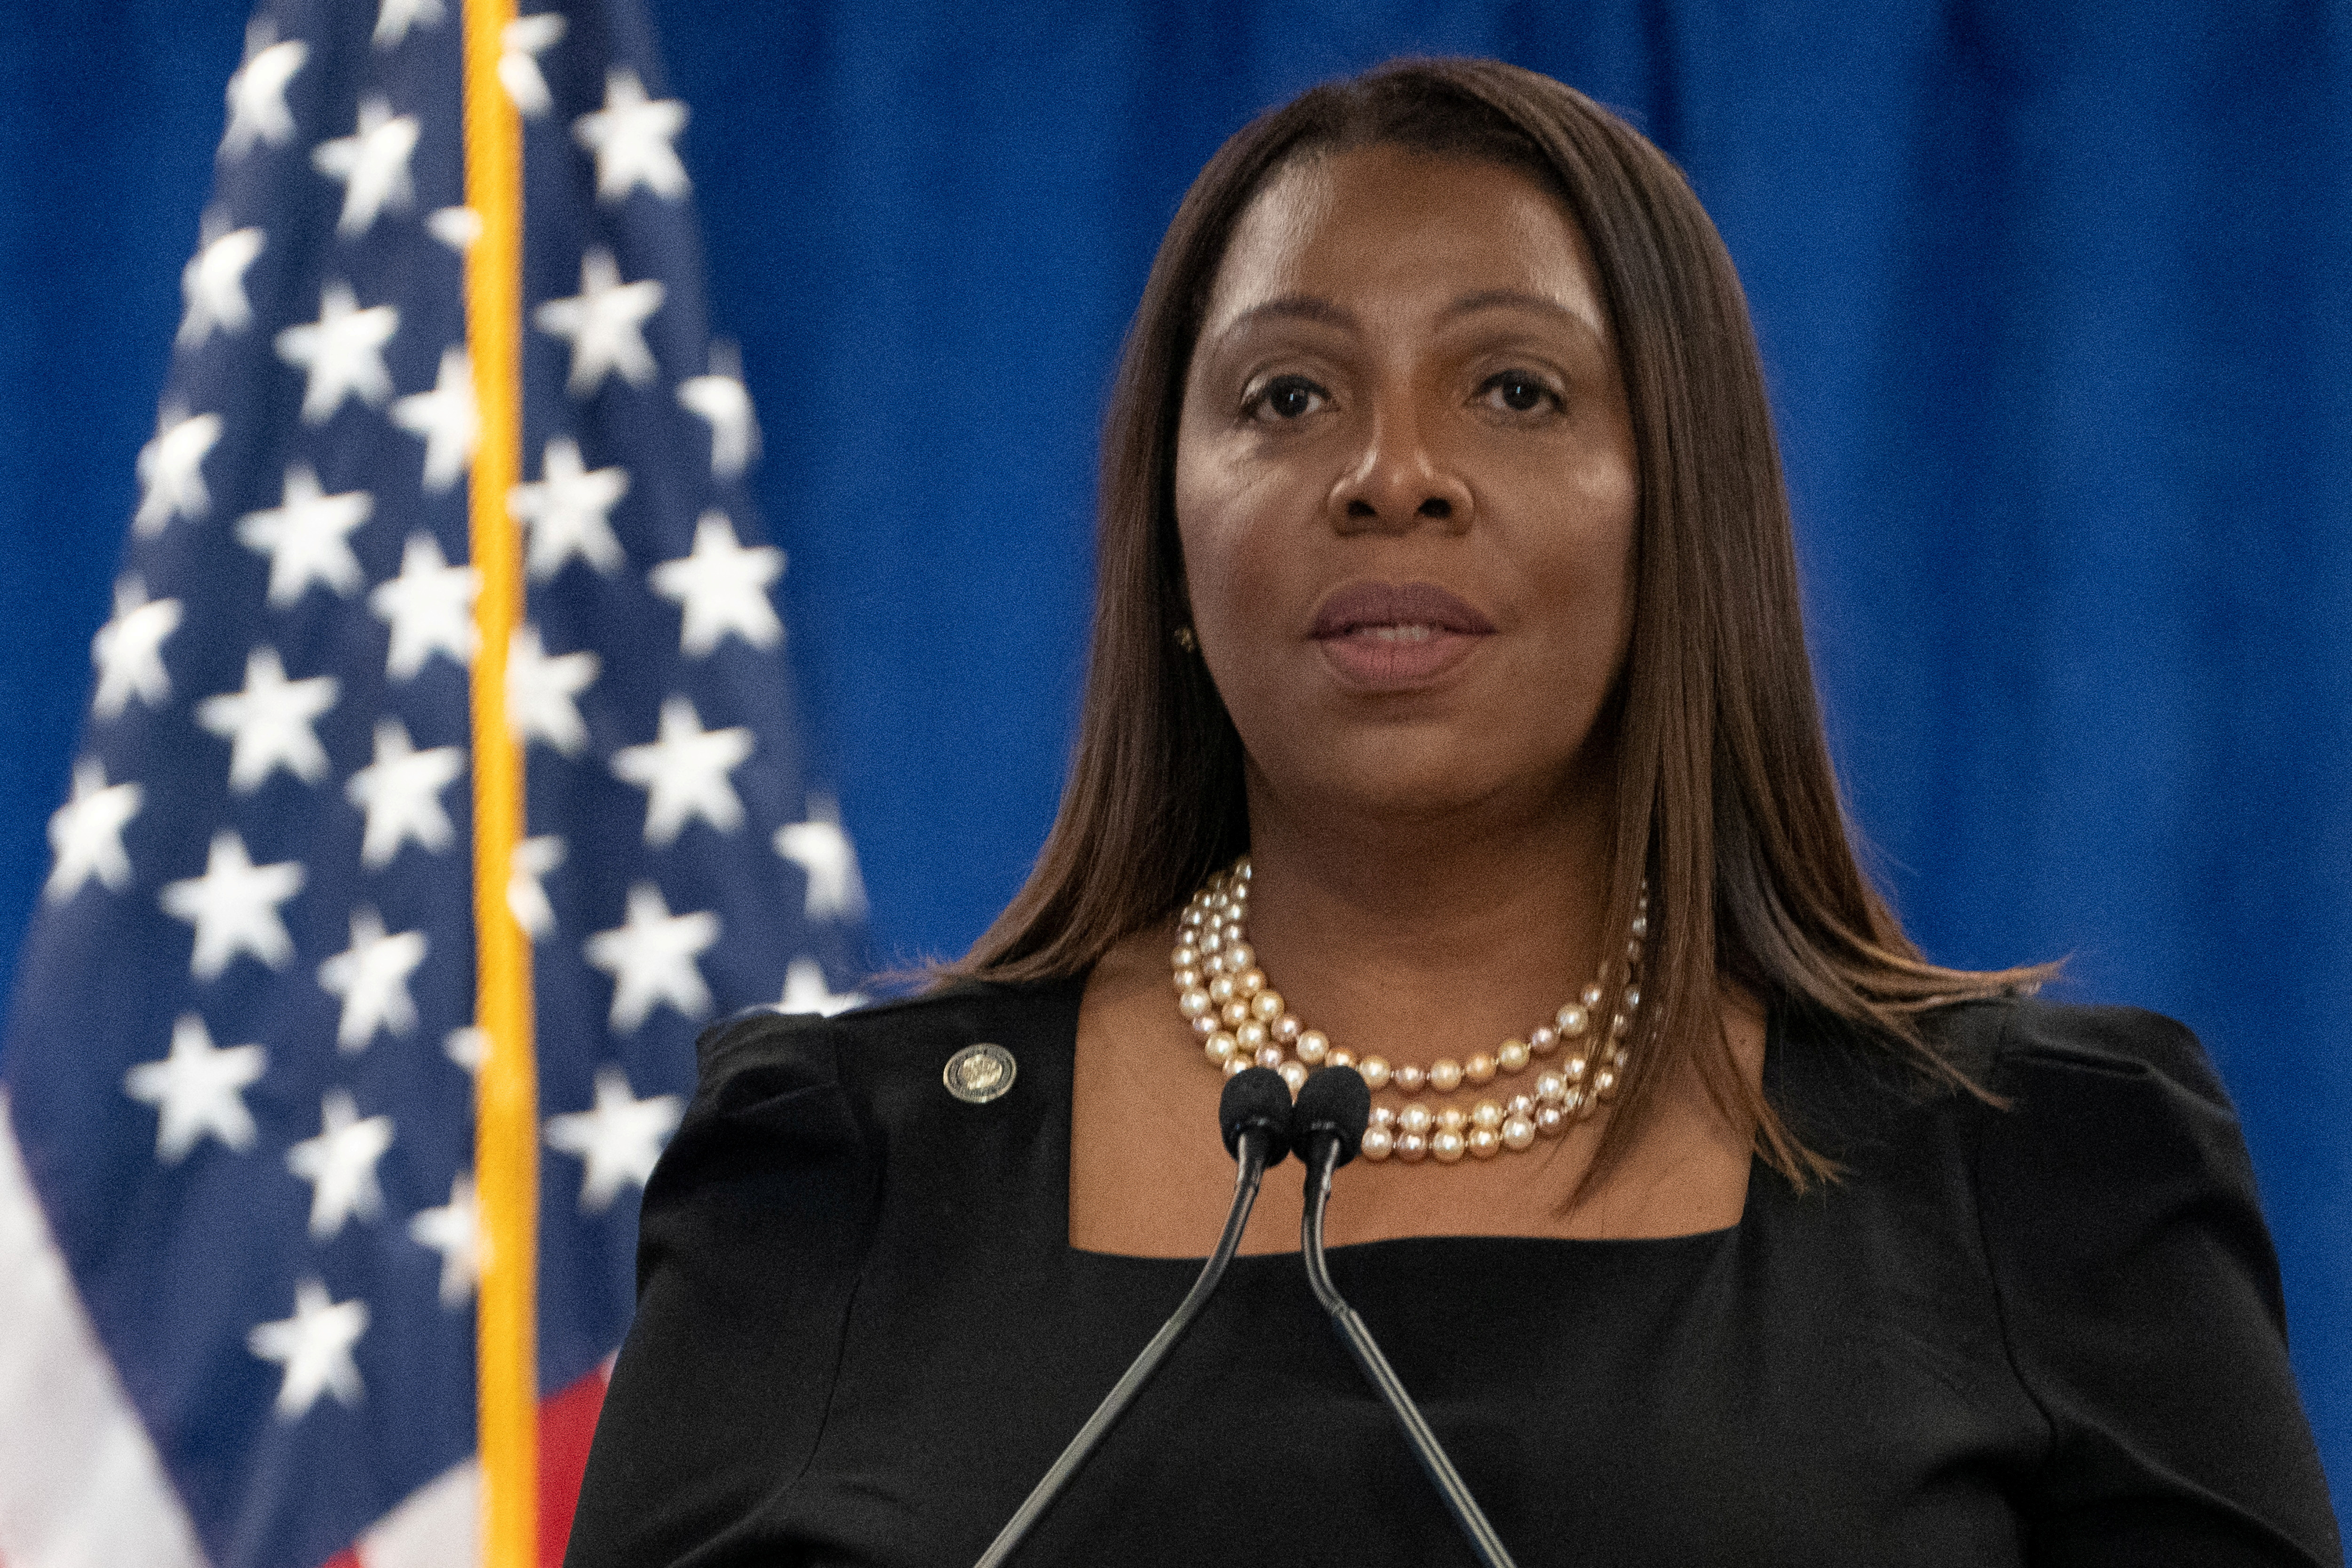 New York Attorney General Letitia James holds a press conference following a ruling against former U.S. President Donald Trump, in New York City